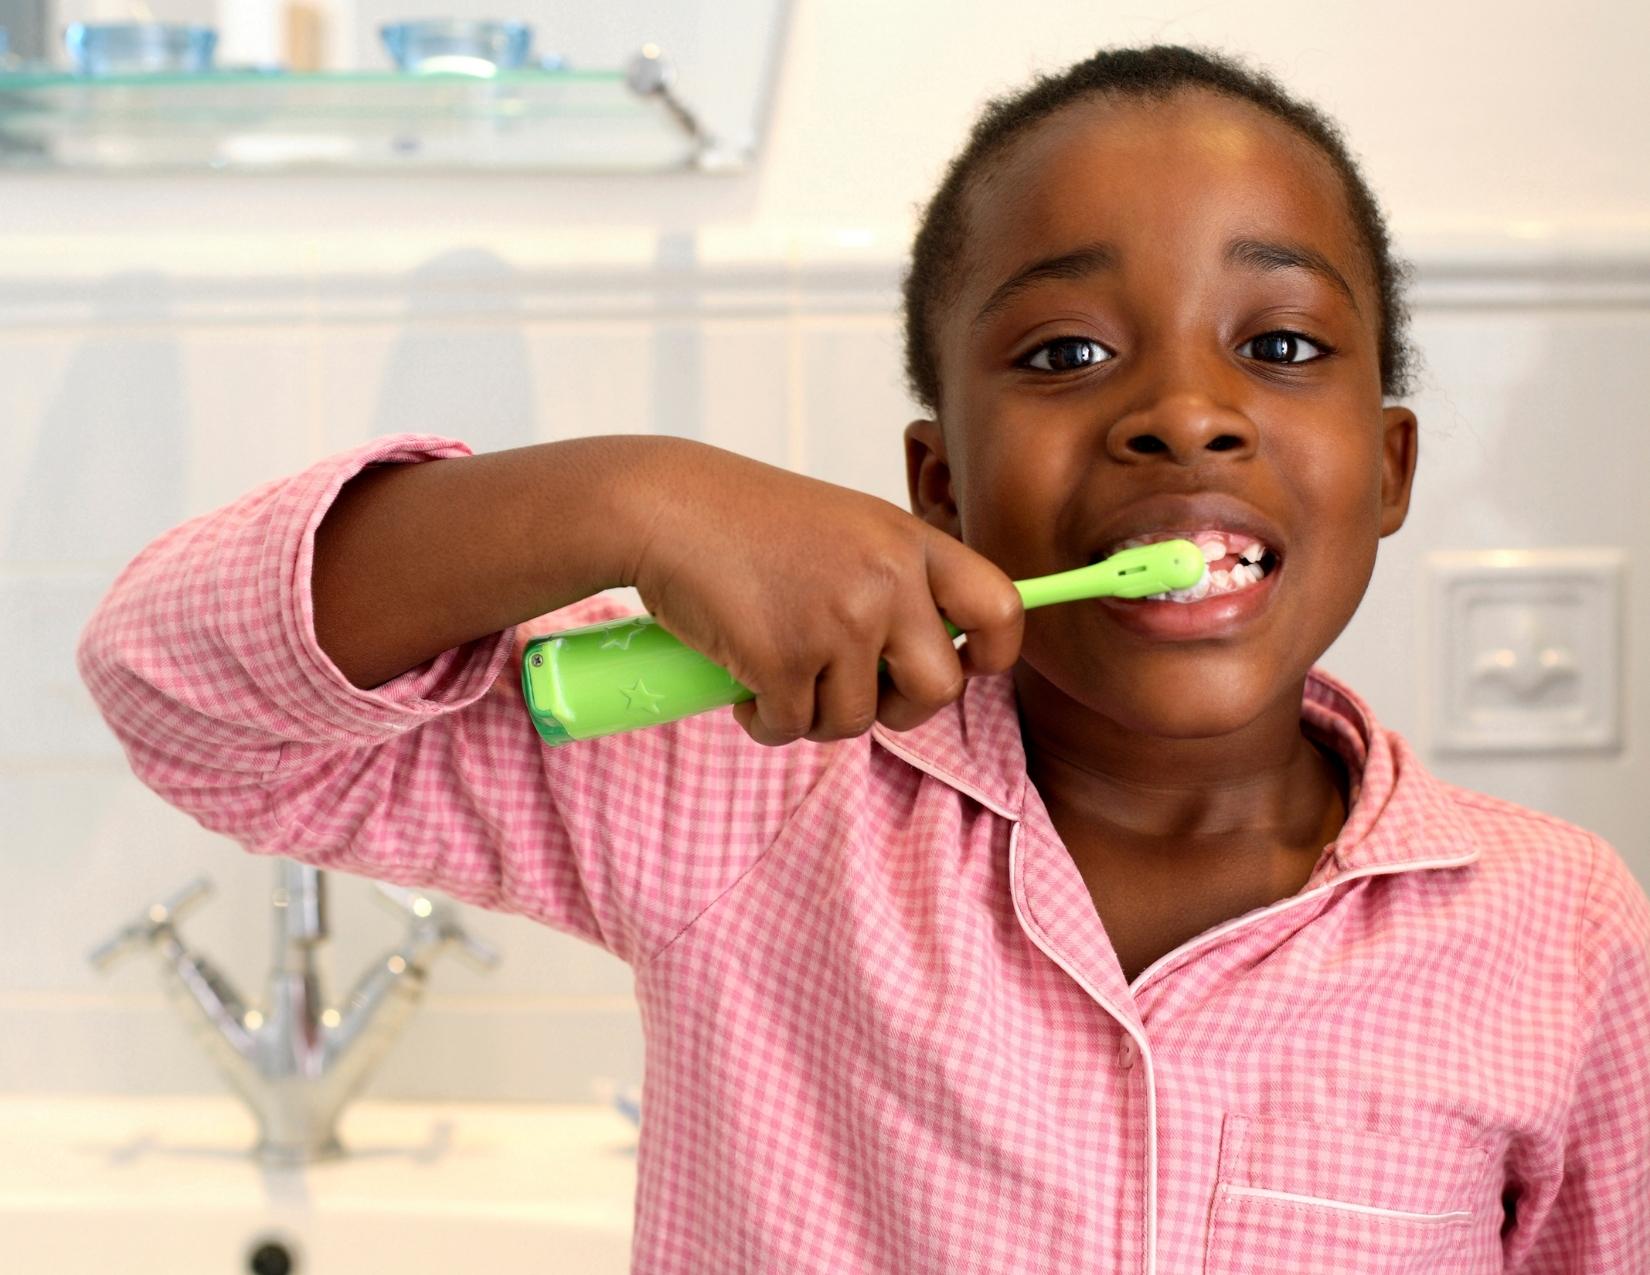 A black child brushes their teeth in the bathroom with a green toothbrush while wearing light red checked button-up pajamas